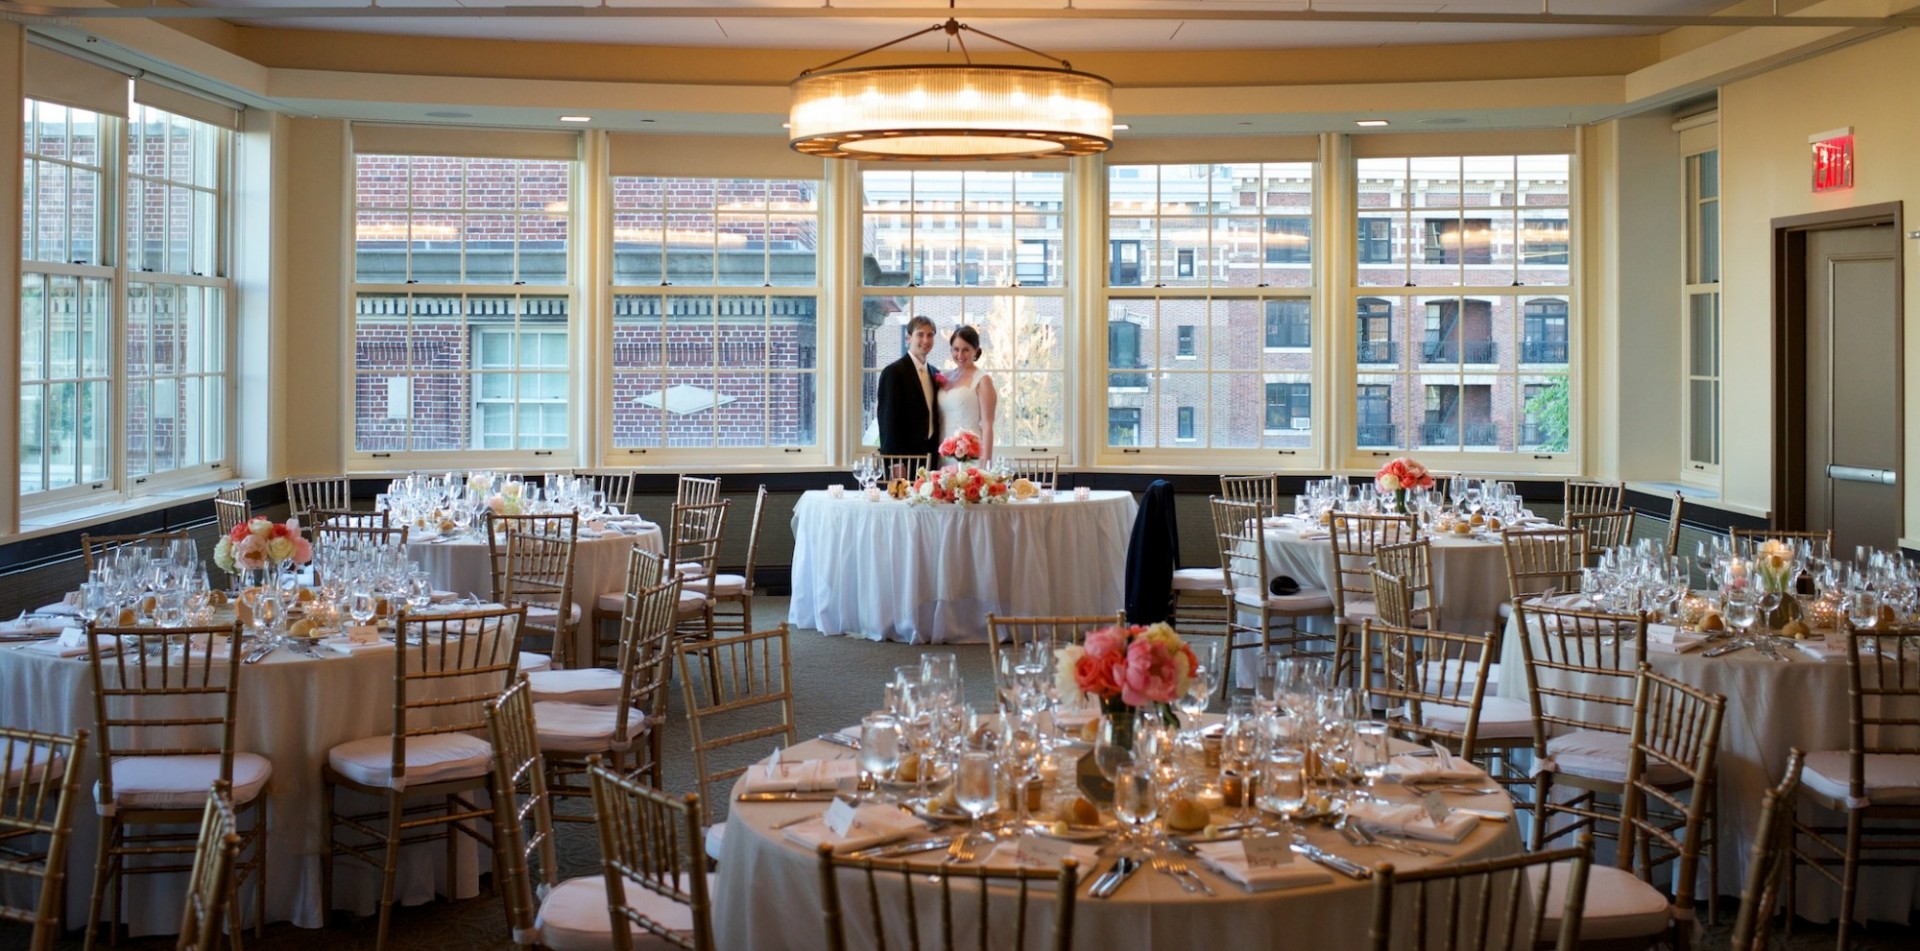 The Faculty House Presidential Ballroom set up as a wedding reception venue, with table set up throughout the room and the bride and groom standing in the back, smiling.